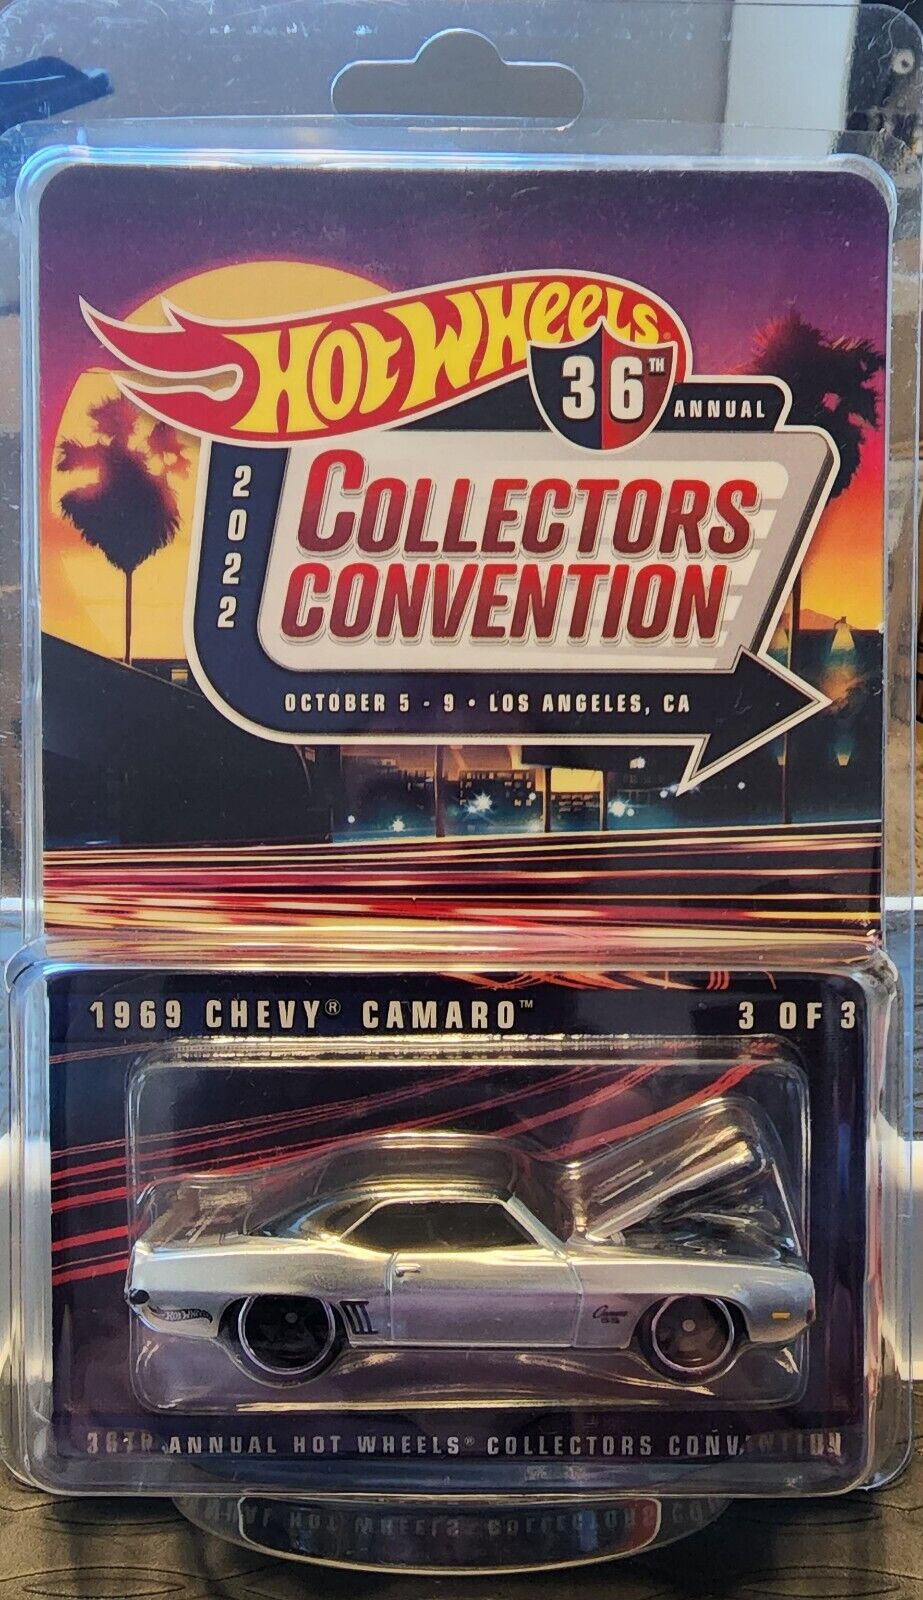 Hot Wheels 1969 Chevy Camaro Finale Car 36TH Annual Collectors Convention